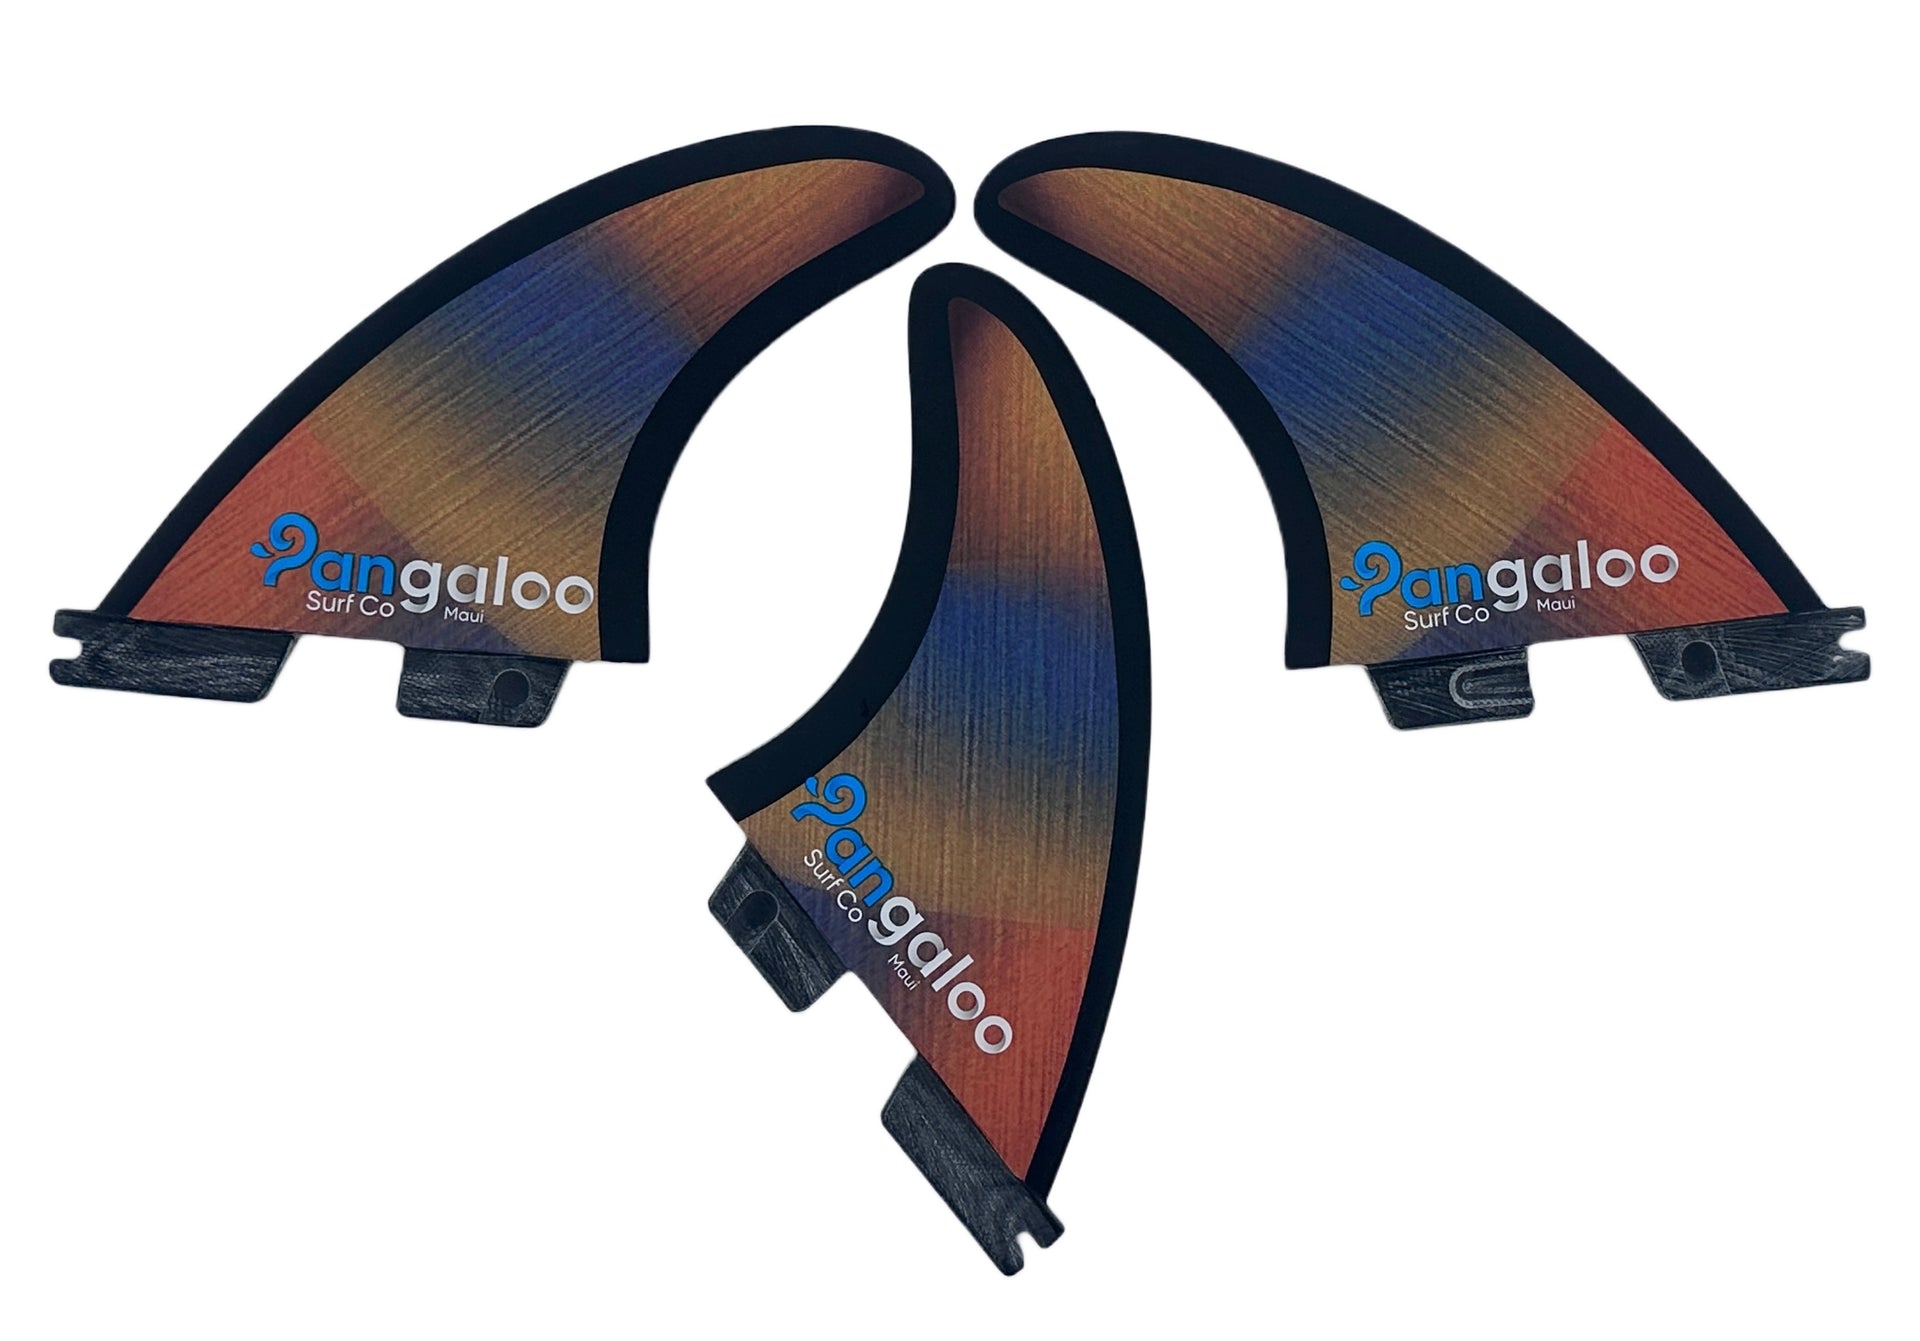 Thruster Surf Fins - Size Small - FCSII Fin Box (Prismatic) – Pangaloo Surf  Co